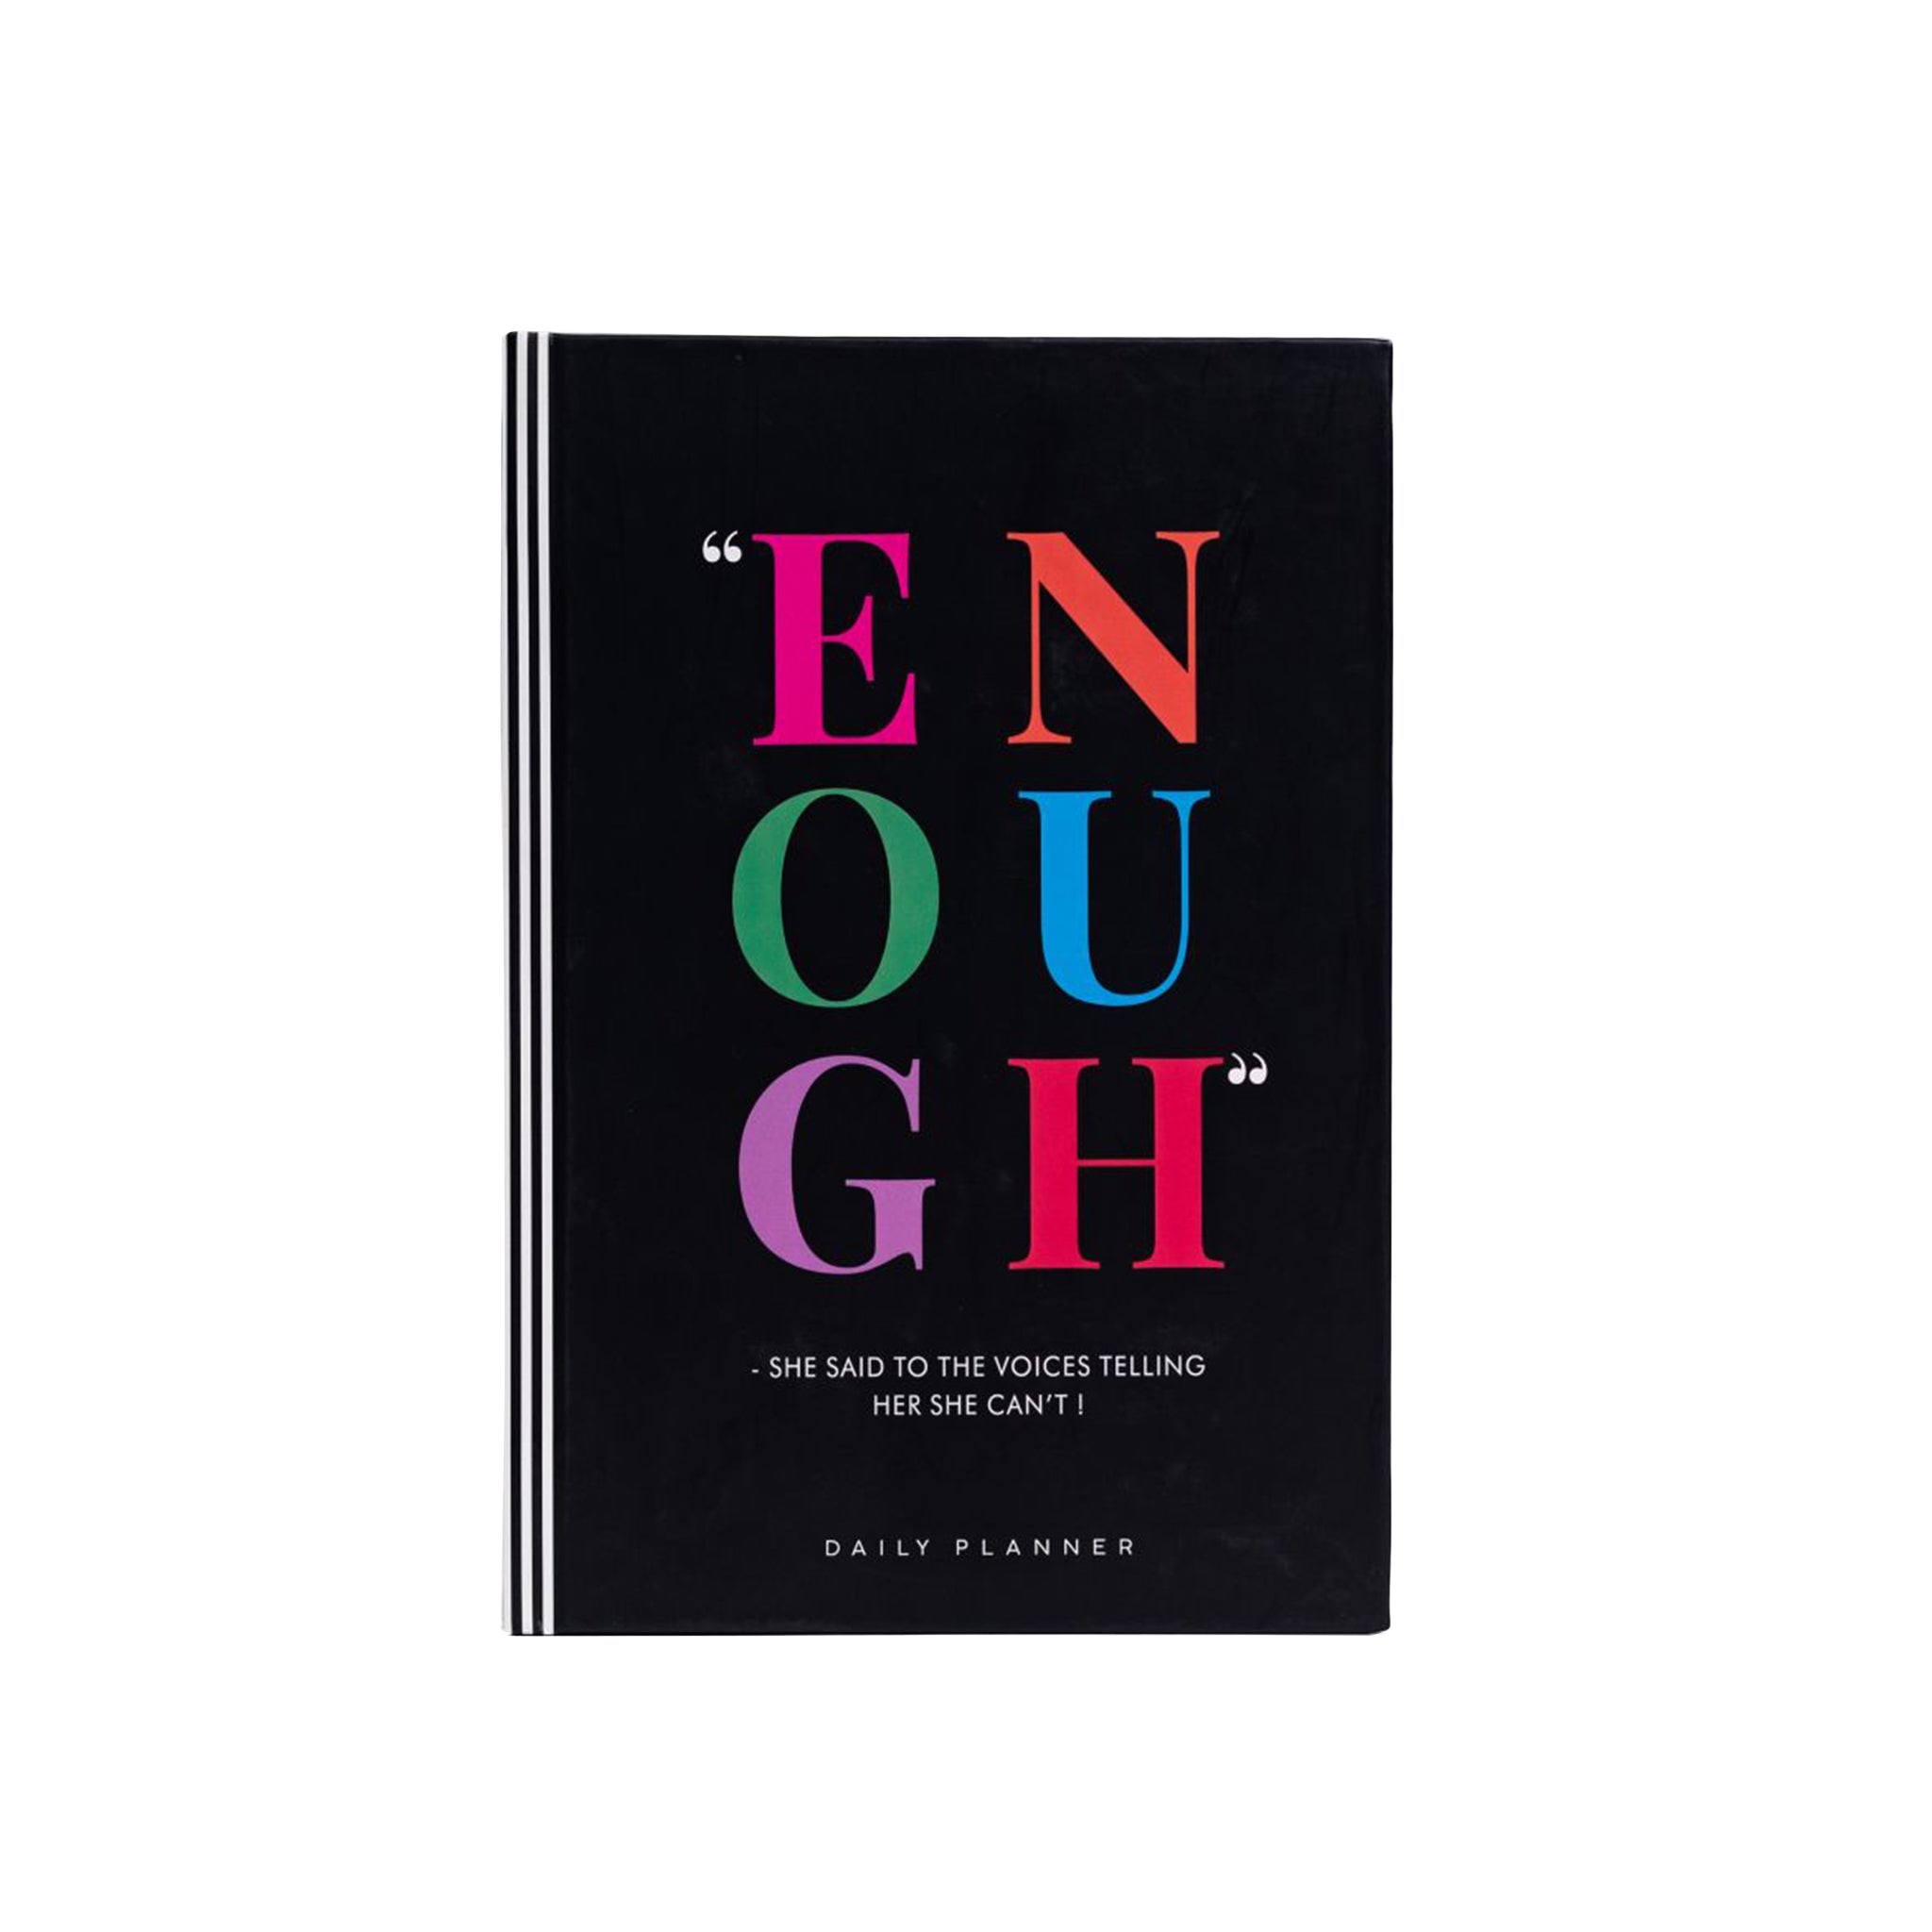 ENOUGH- SHE SAID TO THE VOICES TELLING HER SHE CAN'T ! - Undated Daily Planner